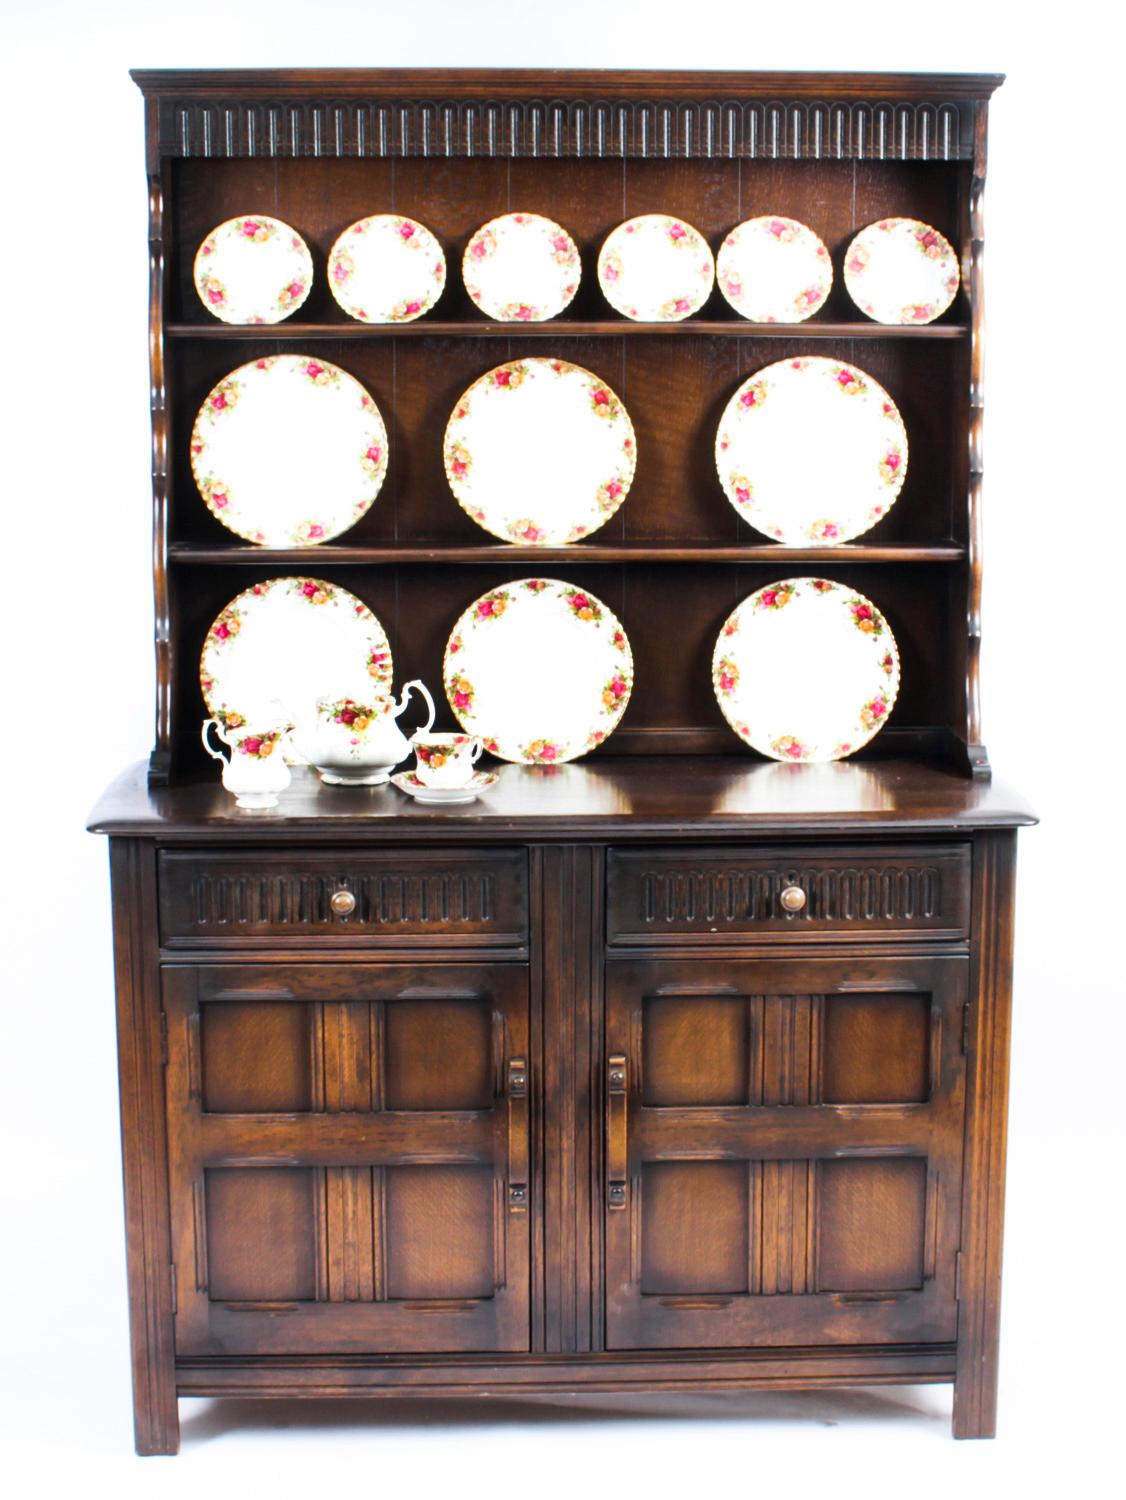 This is a superb Vintage Jacobean revival oak welsh dresser which dates from the second half of the 20th Century.

The top has an open rack with two shelves, the bottom has two capacious drawers over two cupboards with plenty of storage space